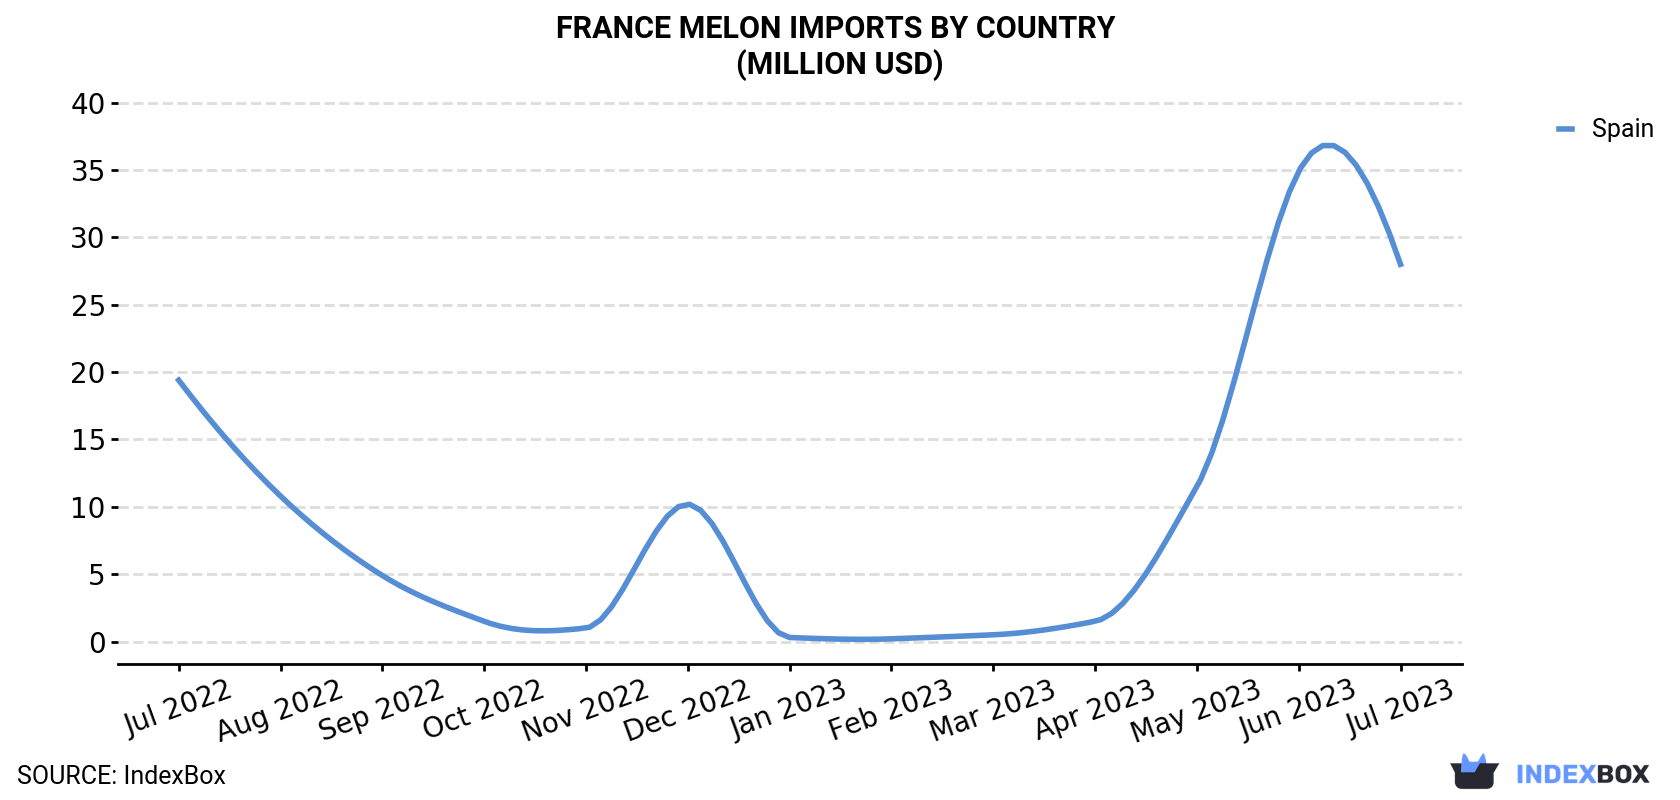 France Melon Imports By Country (Million USD)